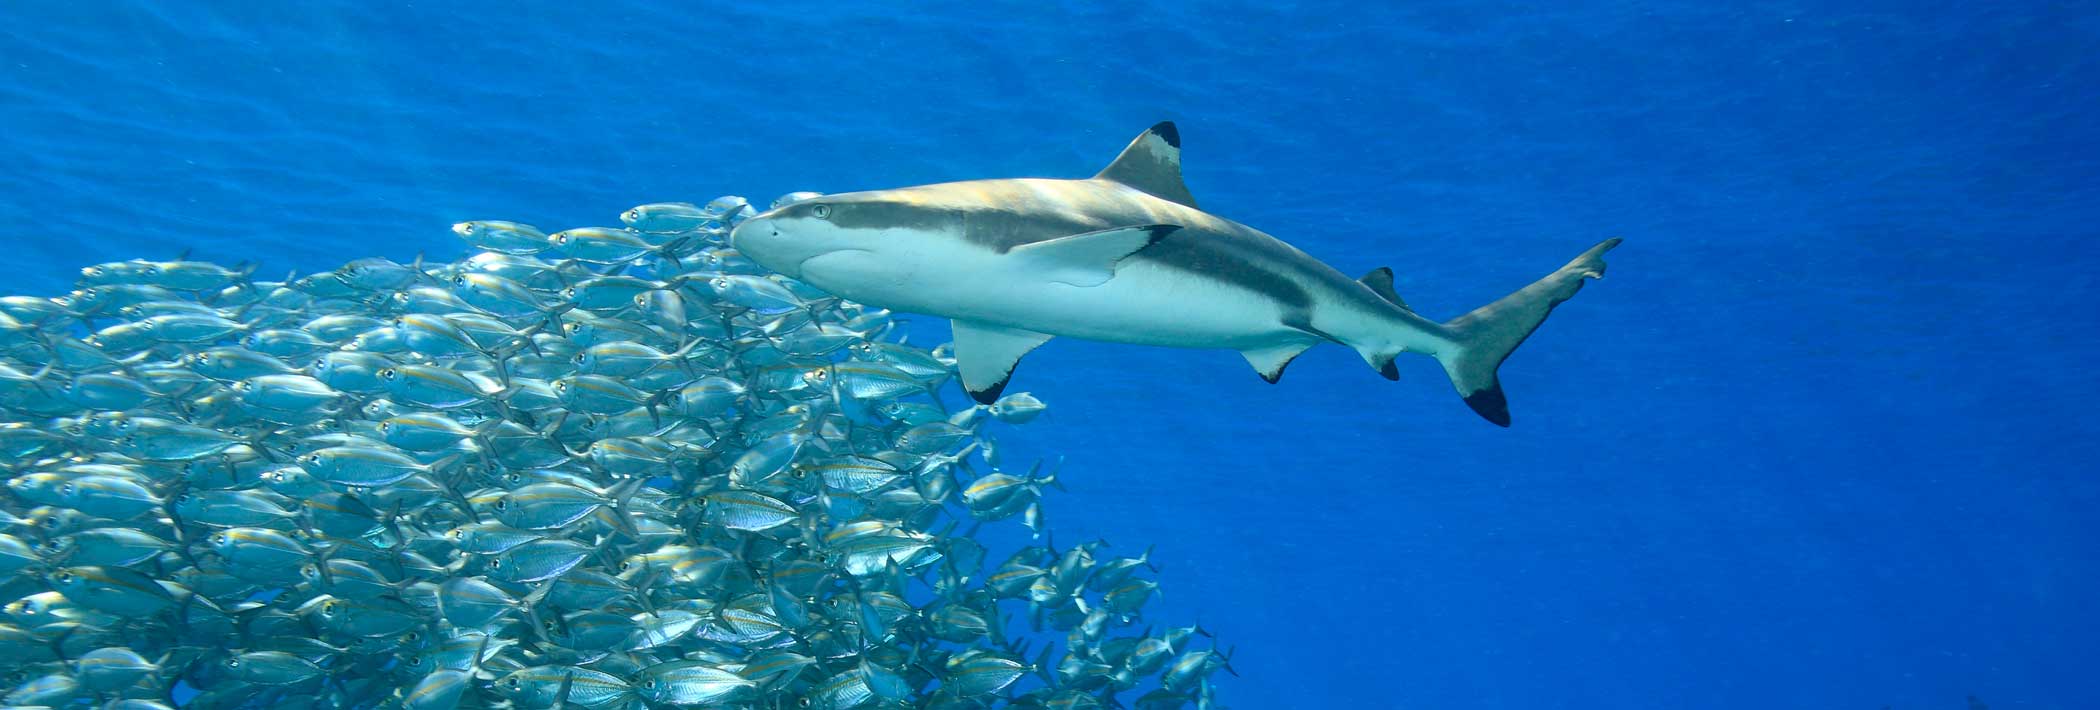 A shoal of smaller fish keeps its distance from the shark